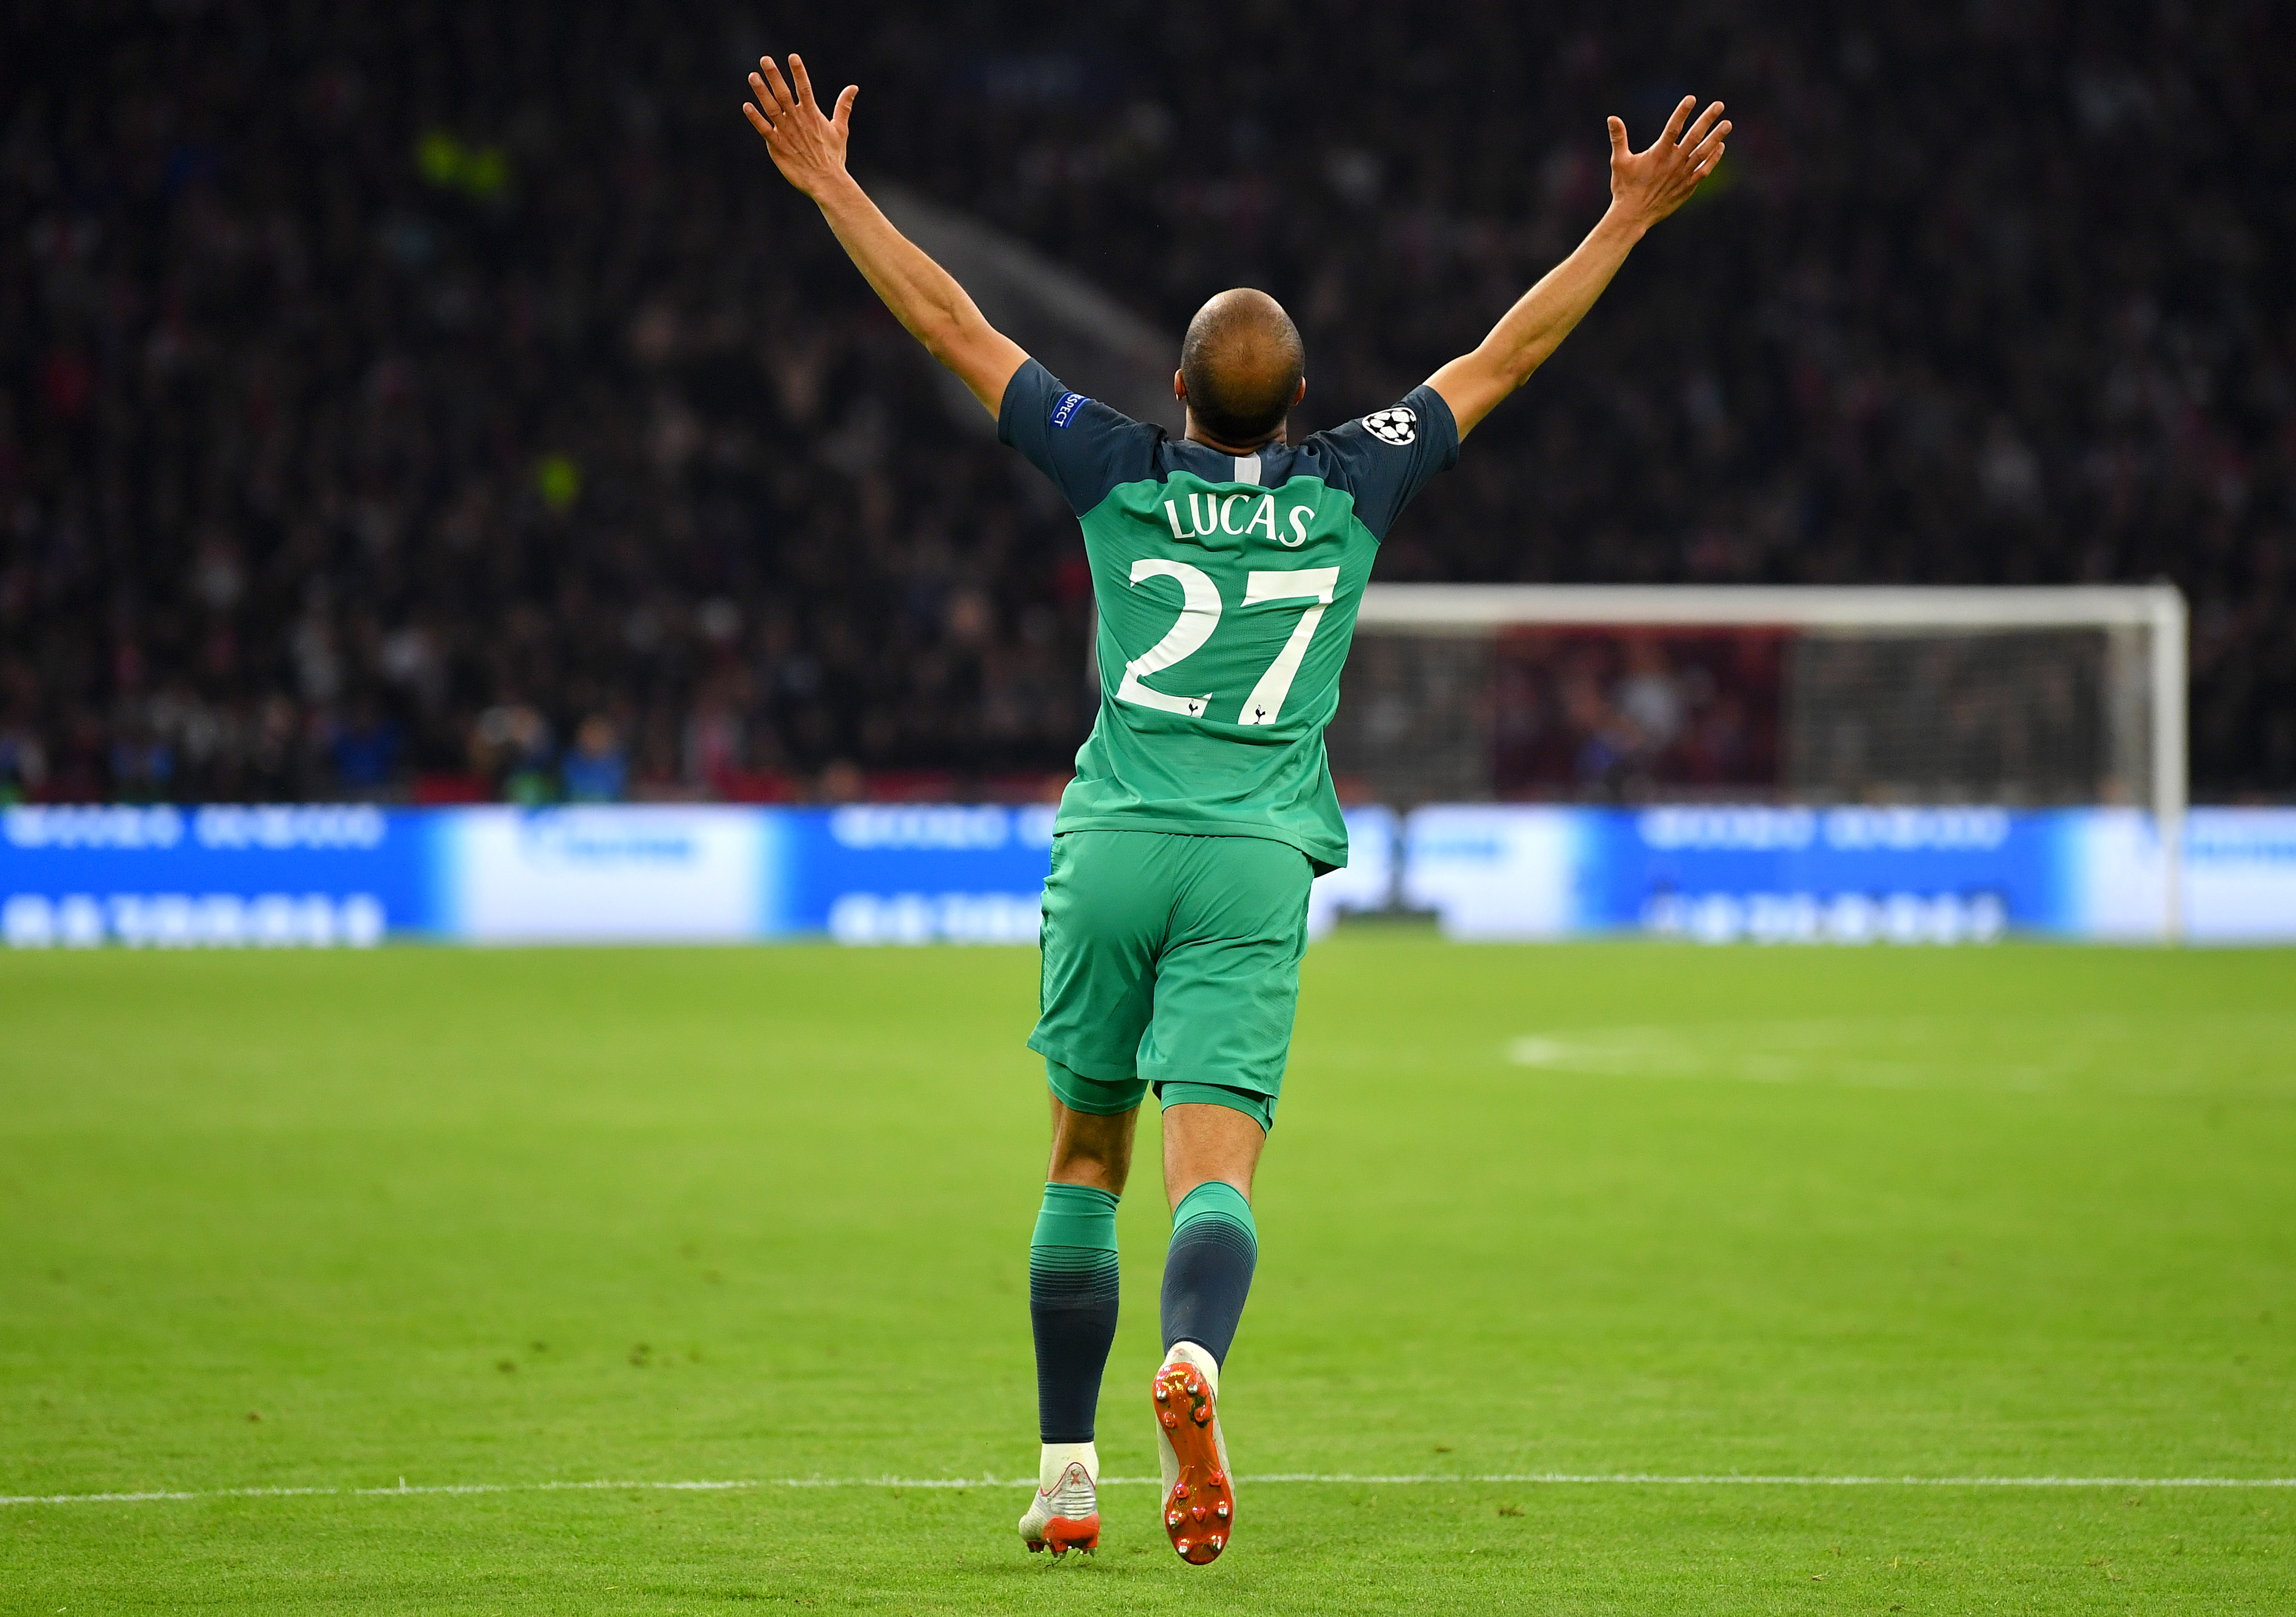 AMSTERDAM, NETHERLANDS - MAY 08: Lucas Moura of Tottenham Hotspur celebrates after scoring his team's second goal during the UEFA Champions League Semi Final second leg match between Ajax and Tottenham Hotspur at the Johan Cruyff Arena on May 08, 2019 in Amsterdam, Netherlands. (Photo by Dan Mullan/Getty Images )